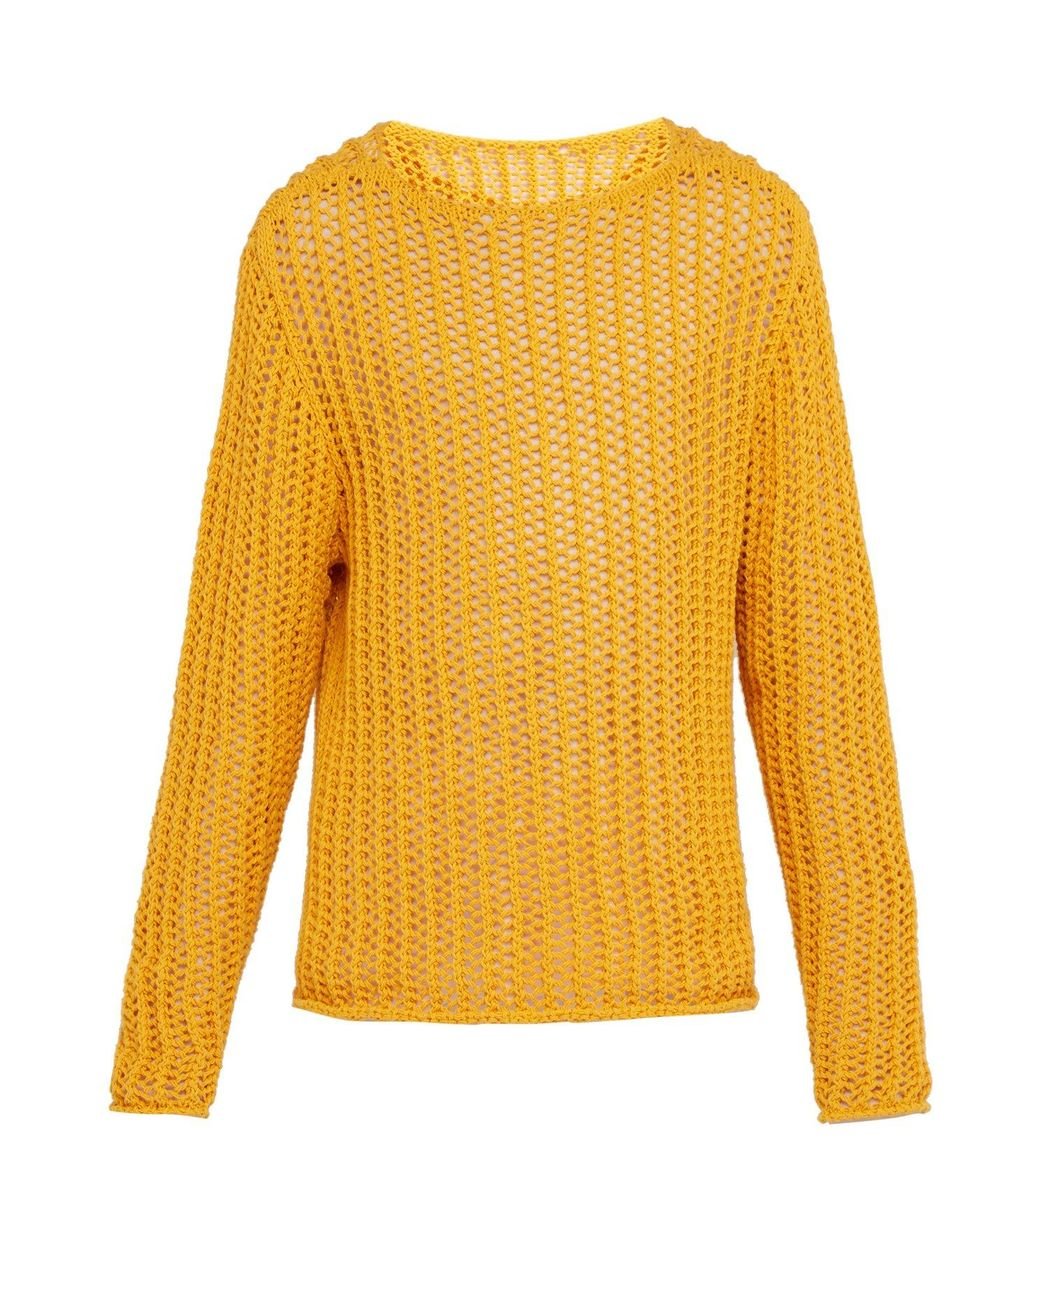 Jacquemus Fishnet Knit Sweater in Yellow for Men | Lyst